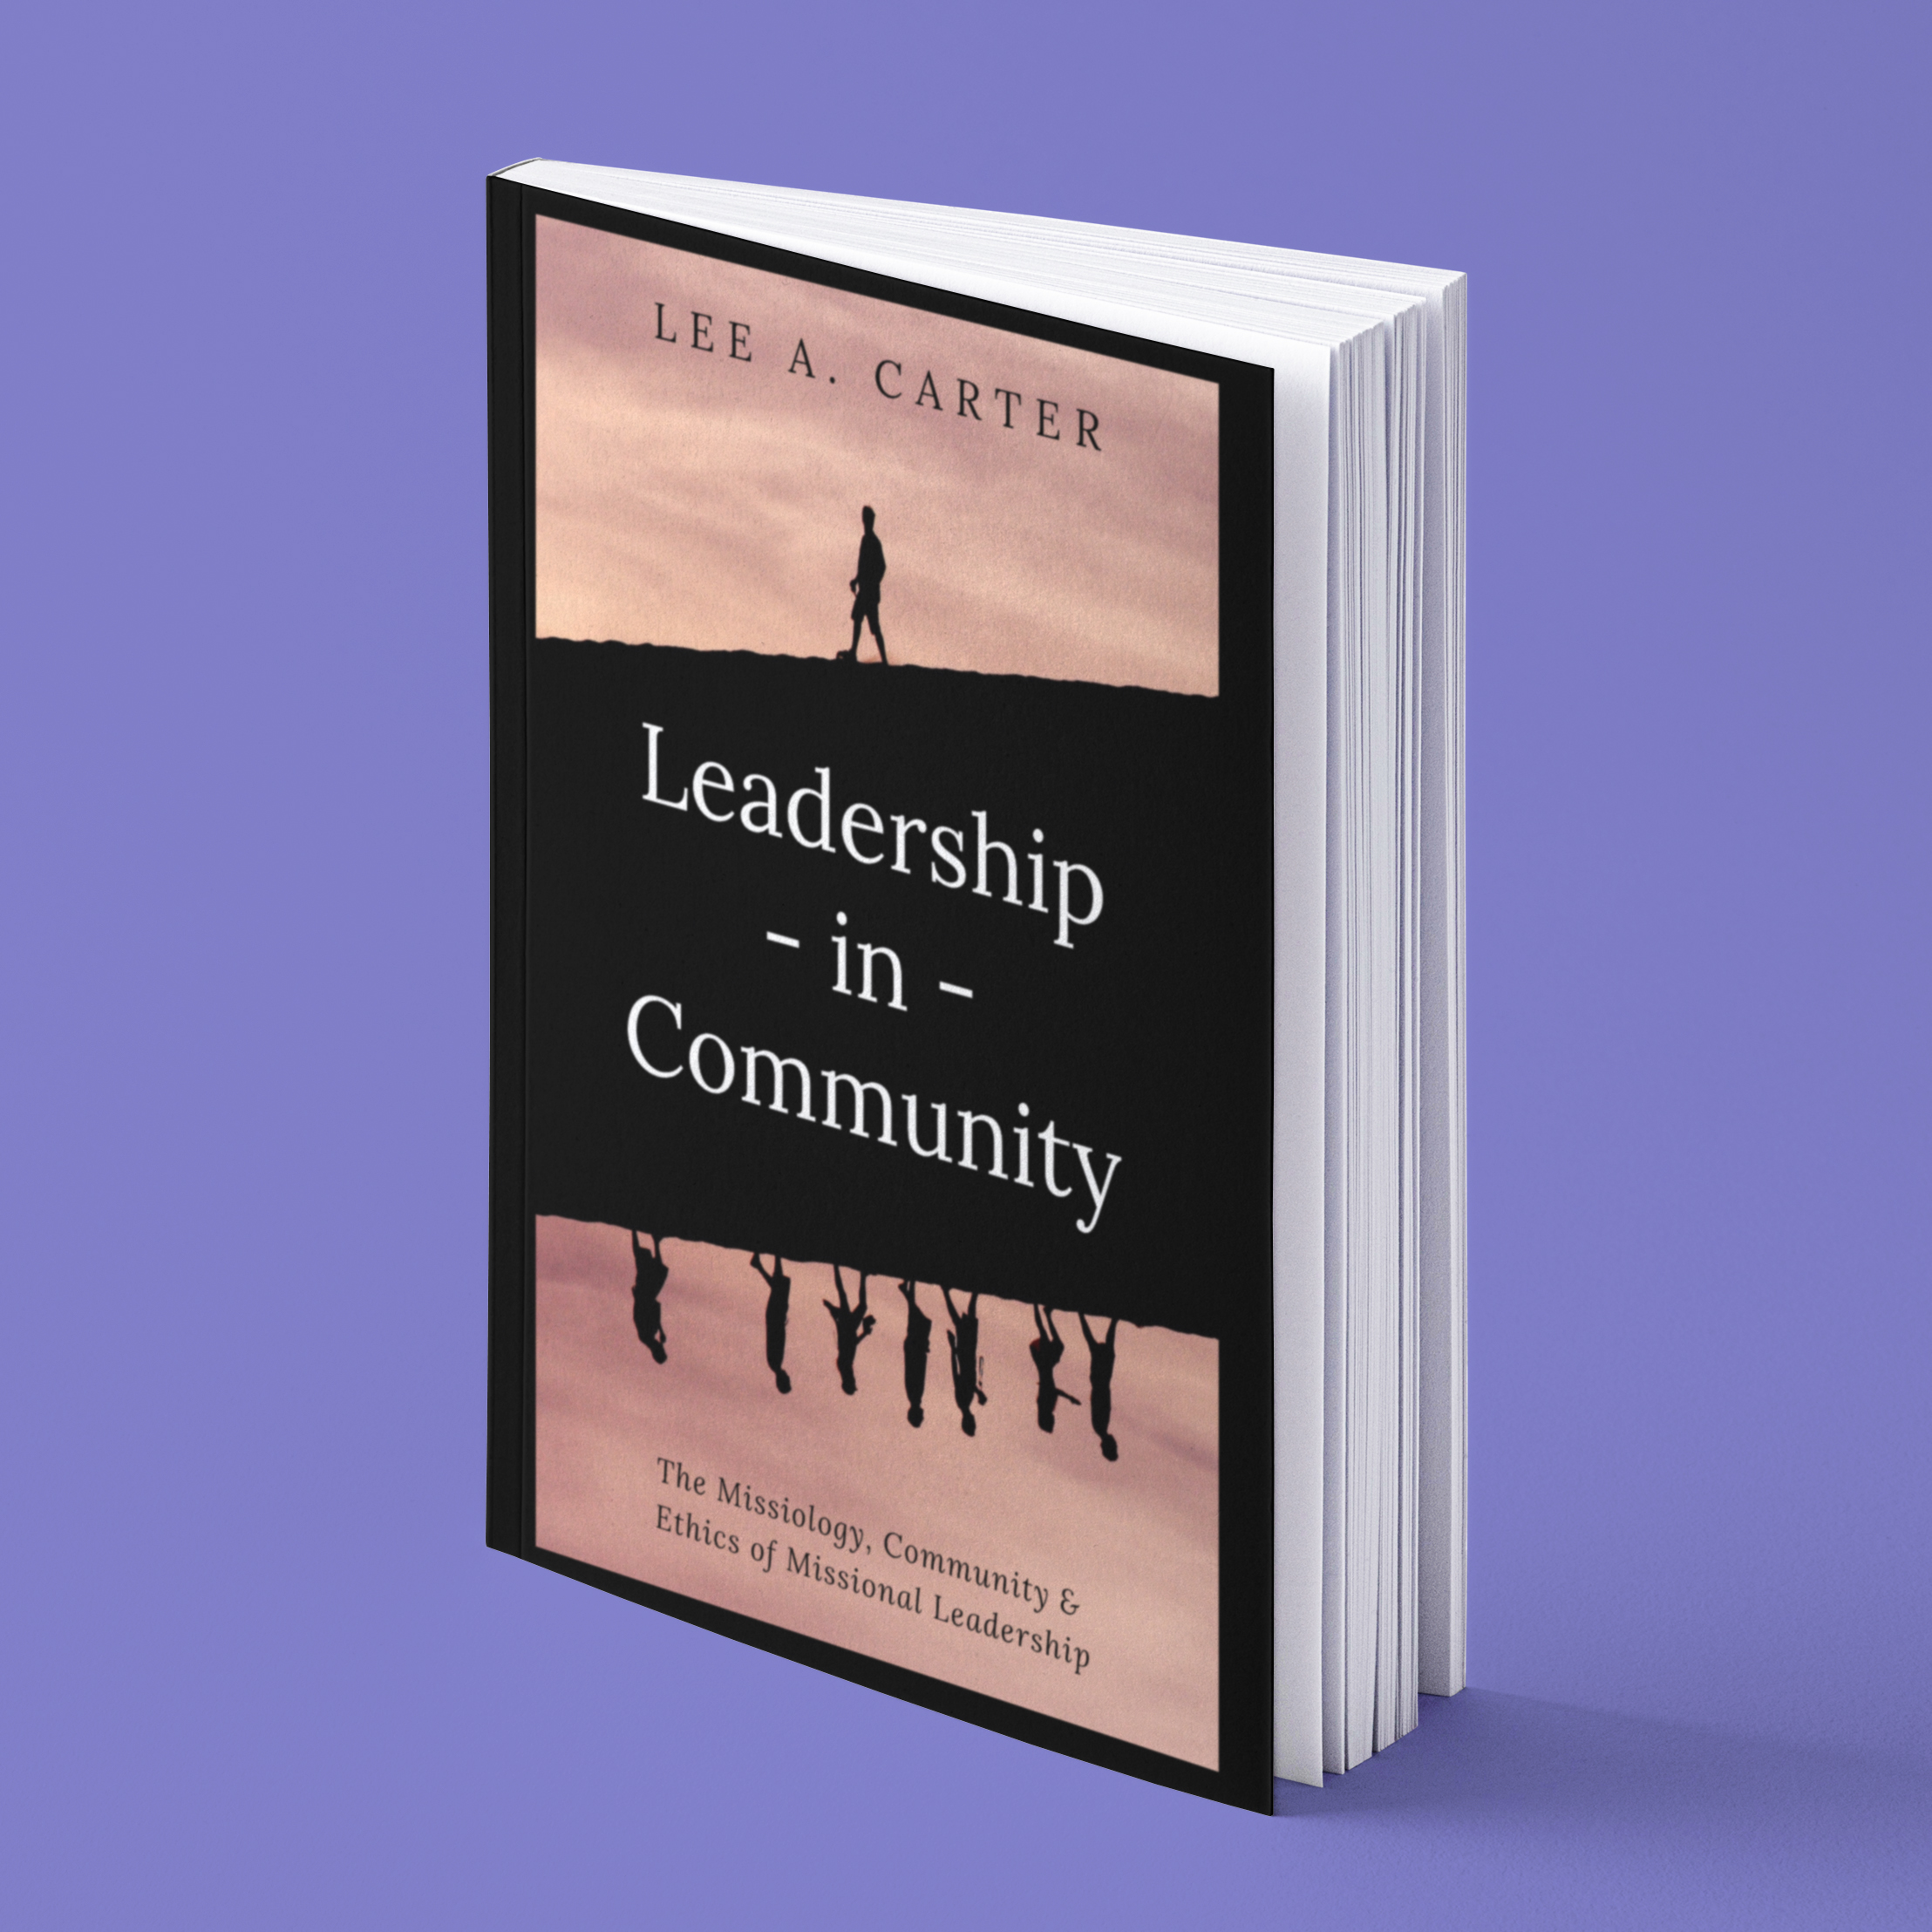 What is Christian leadership? Helpful Answers May be Found in New Book, "Leadership-in-Community: The Missiology, Community & Ethics of Missional Leadership."